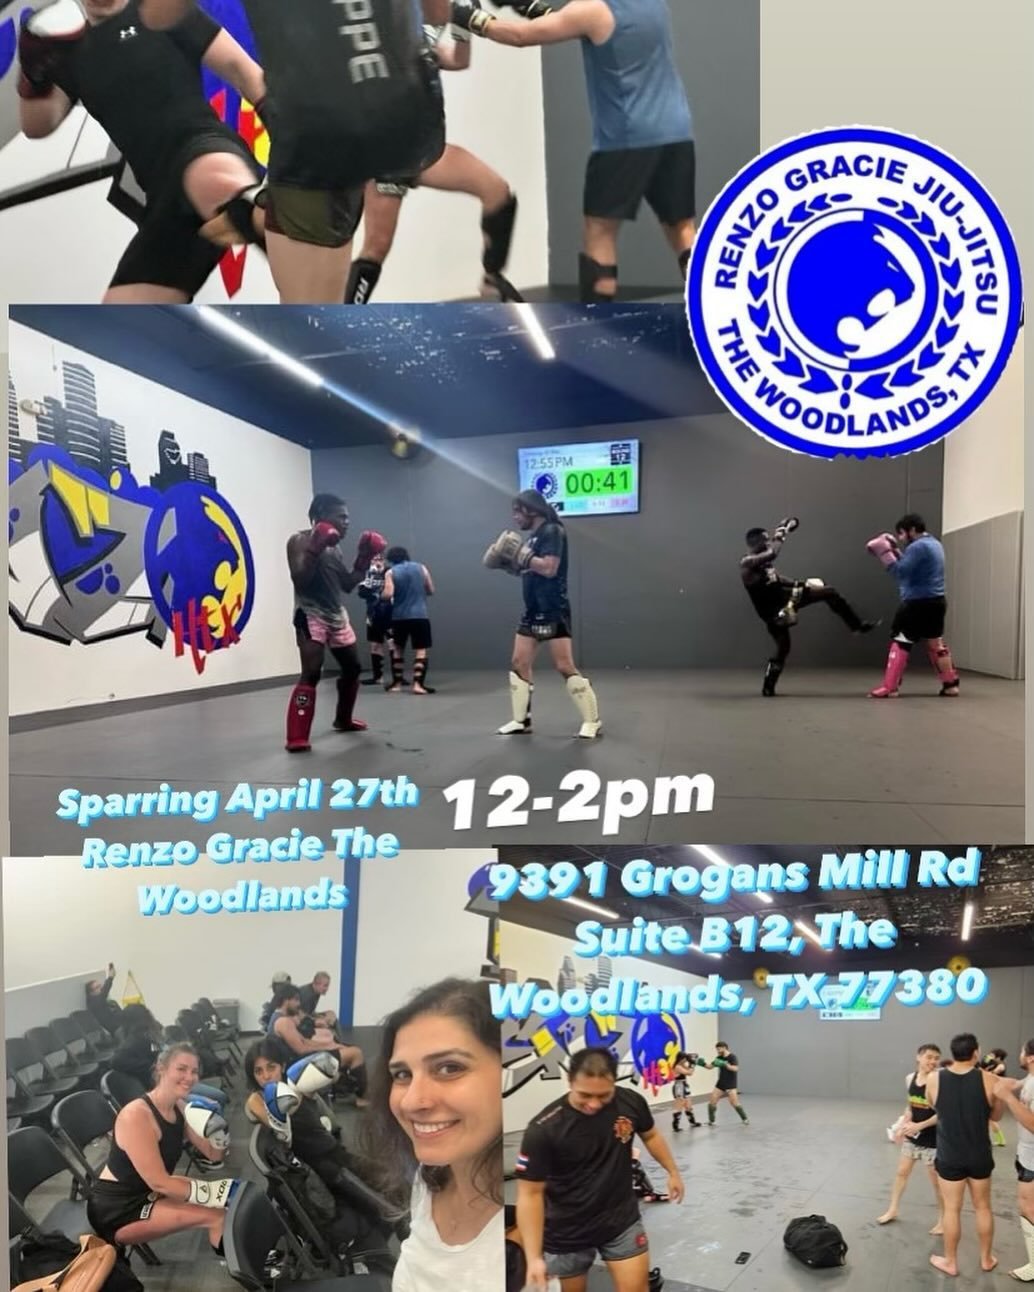 Announcement:📢 Last Saturday Sparring @renzo_gracie_the_woodlands on Saturday, April 27th from 12:00-2:00pm!!! Make sure you bring: Mouth Guard, 16 OZ gloves, shin guards, and a cup. Looking forward to seeing y&rsquo;all there!!!! @smtphilisopher30 